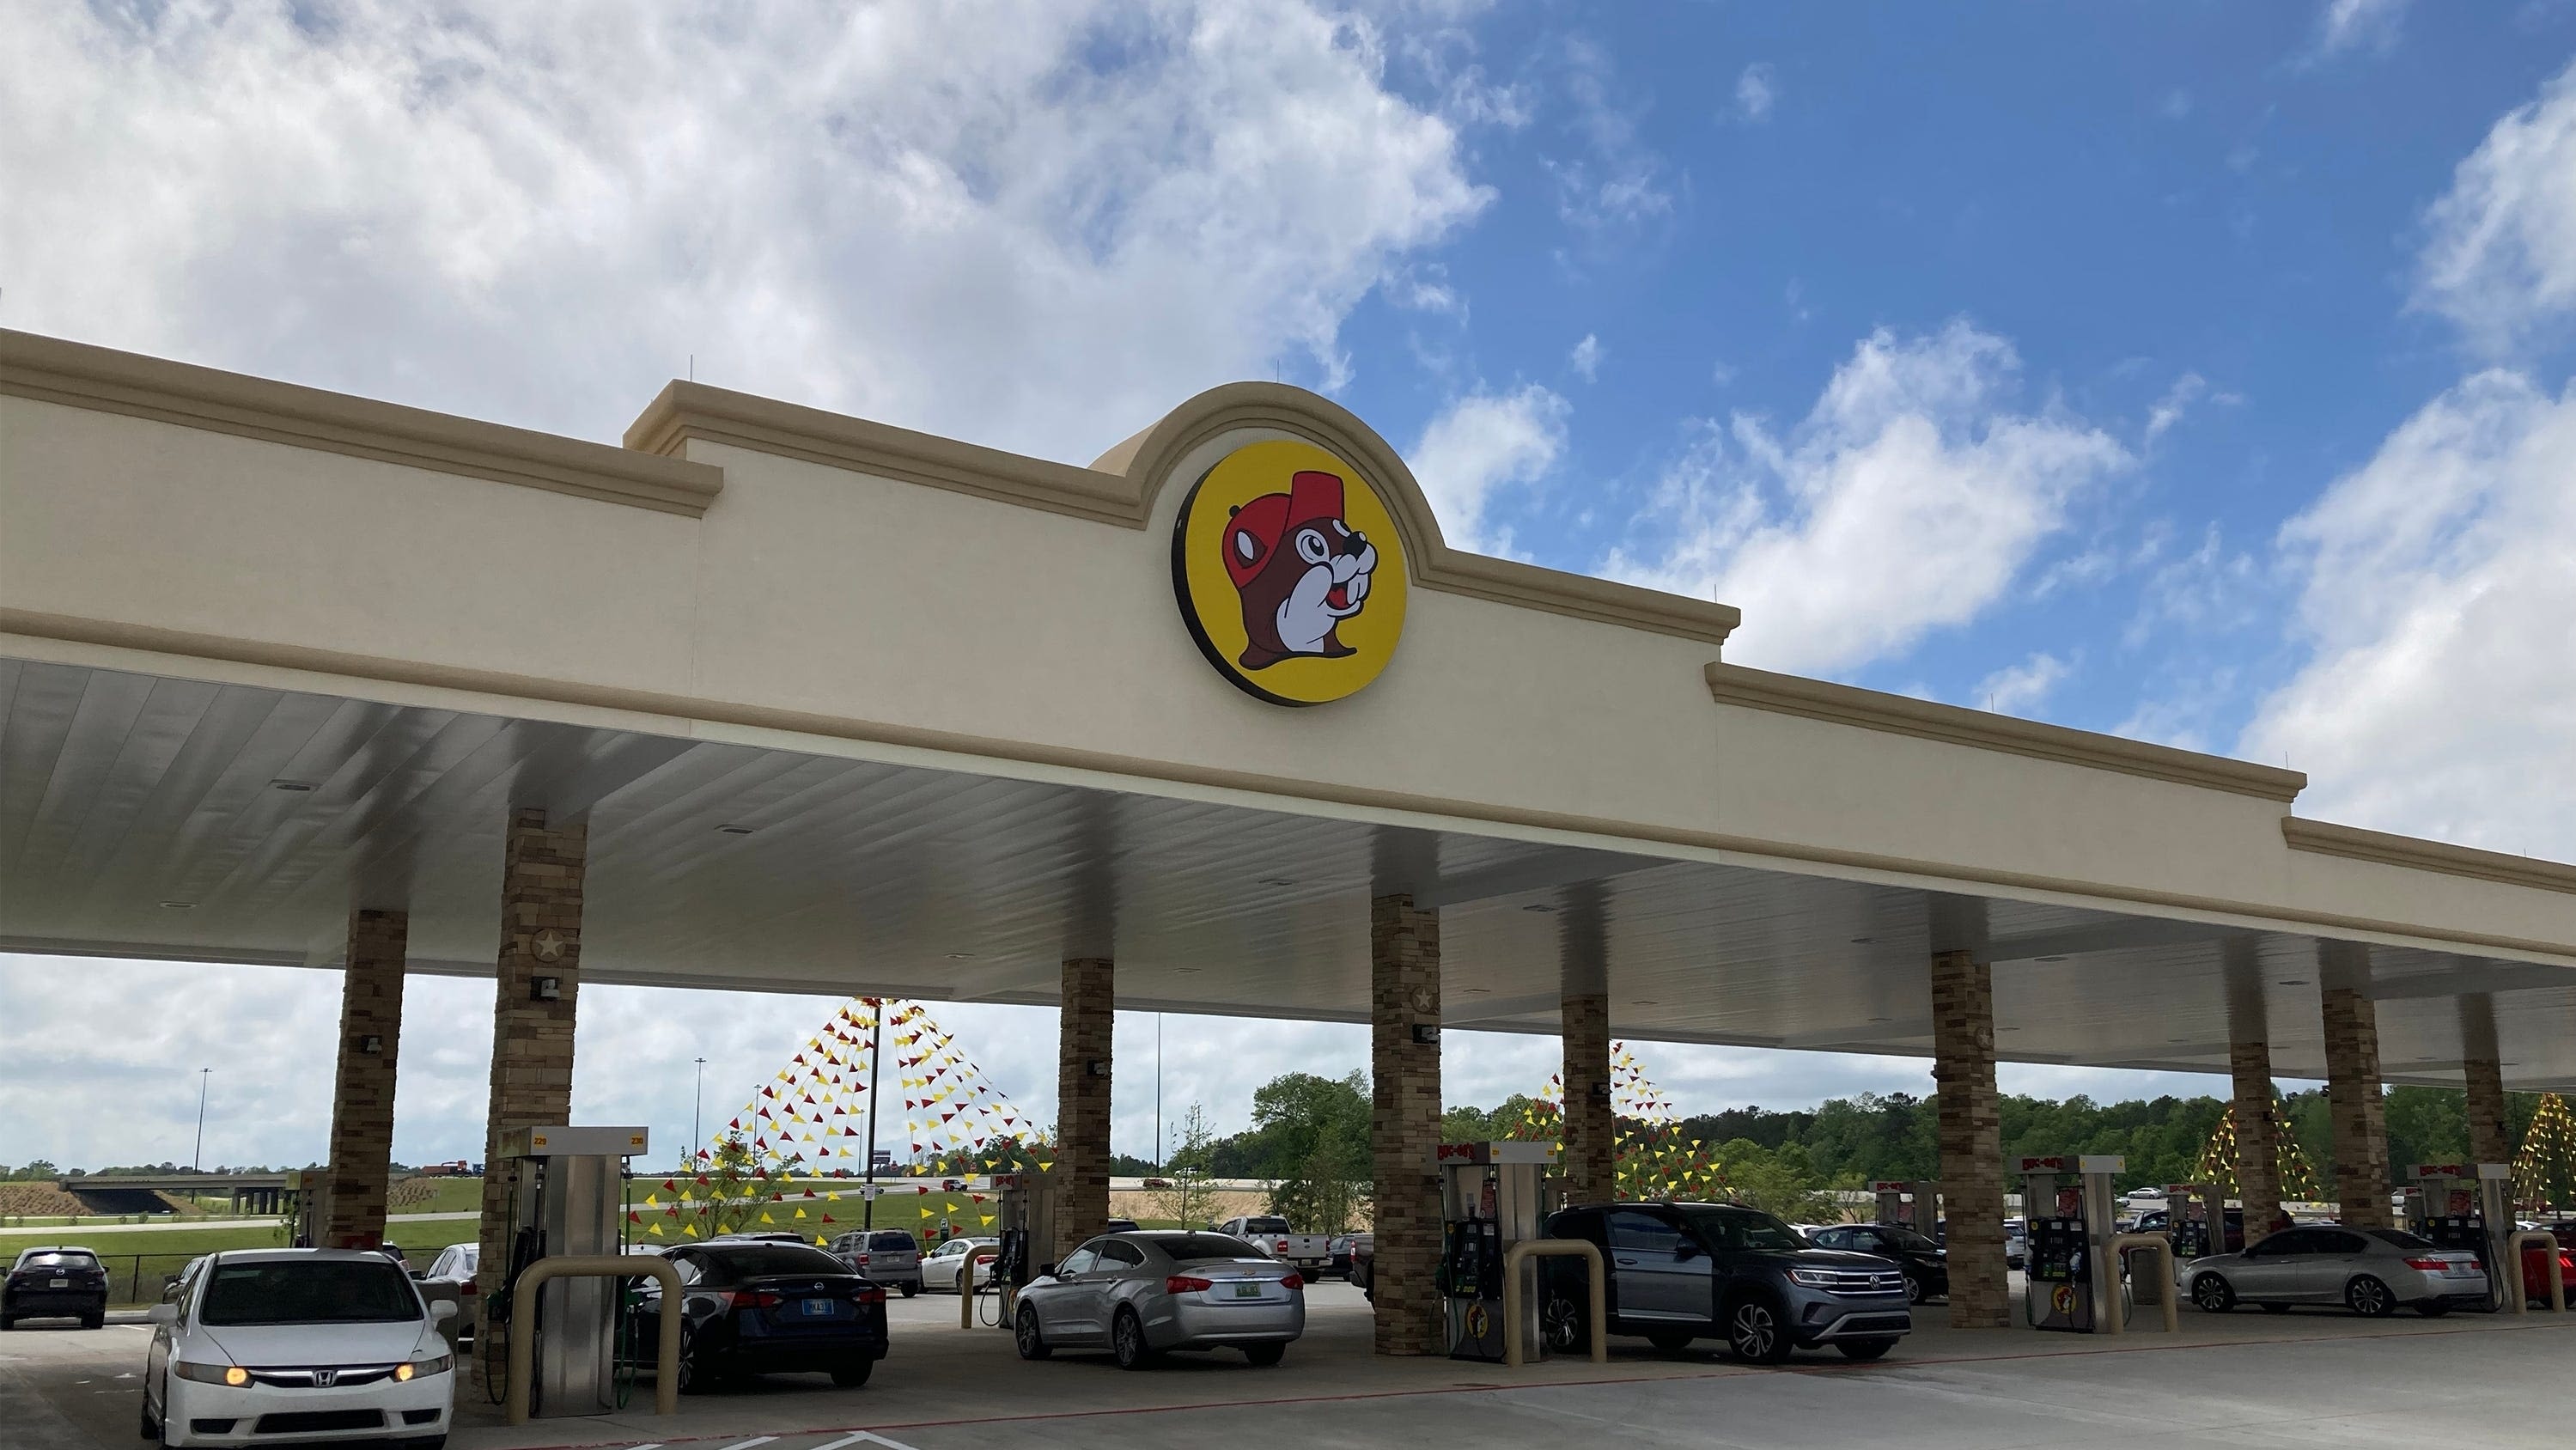 Son of Buc-ee's co-founder indicted after secretly recording people in bathrooms of Texas homes, officials say